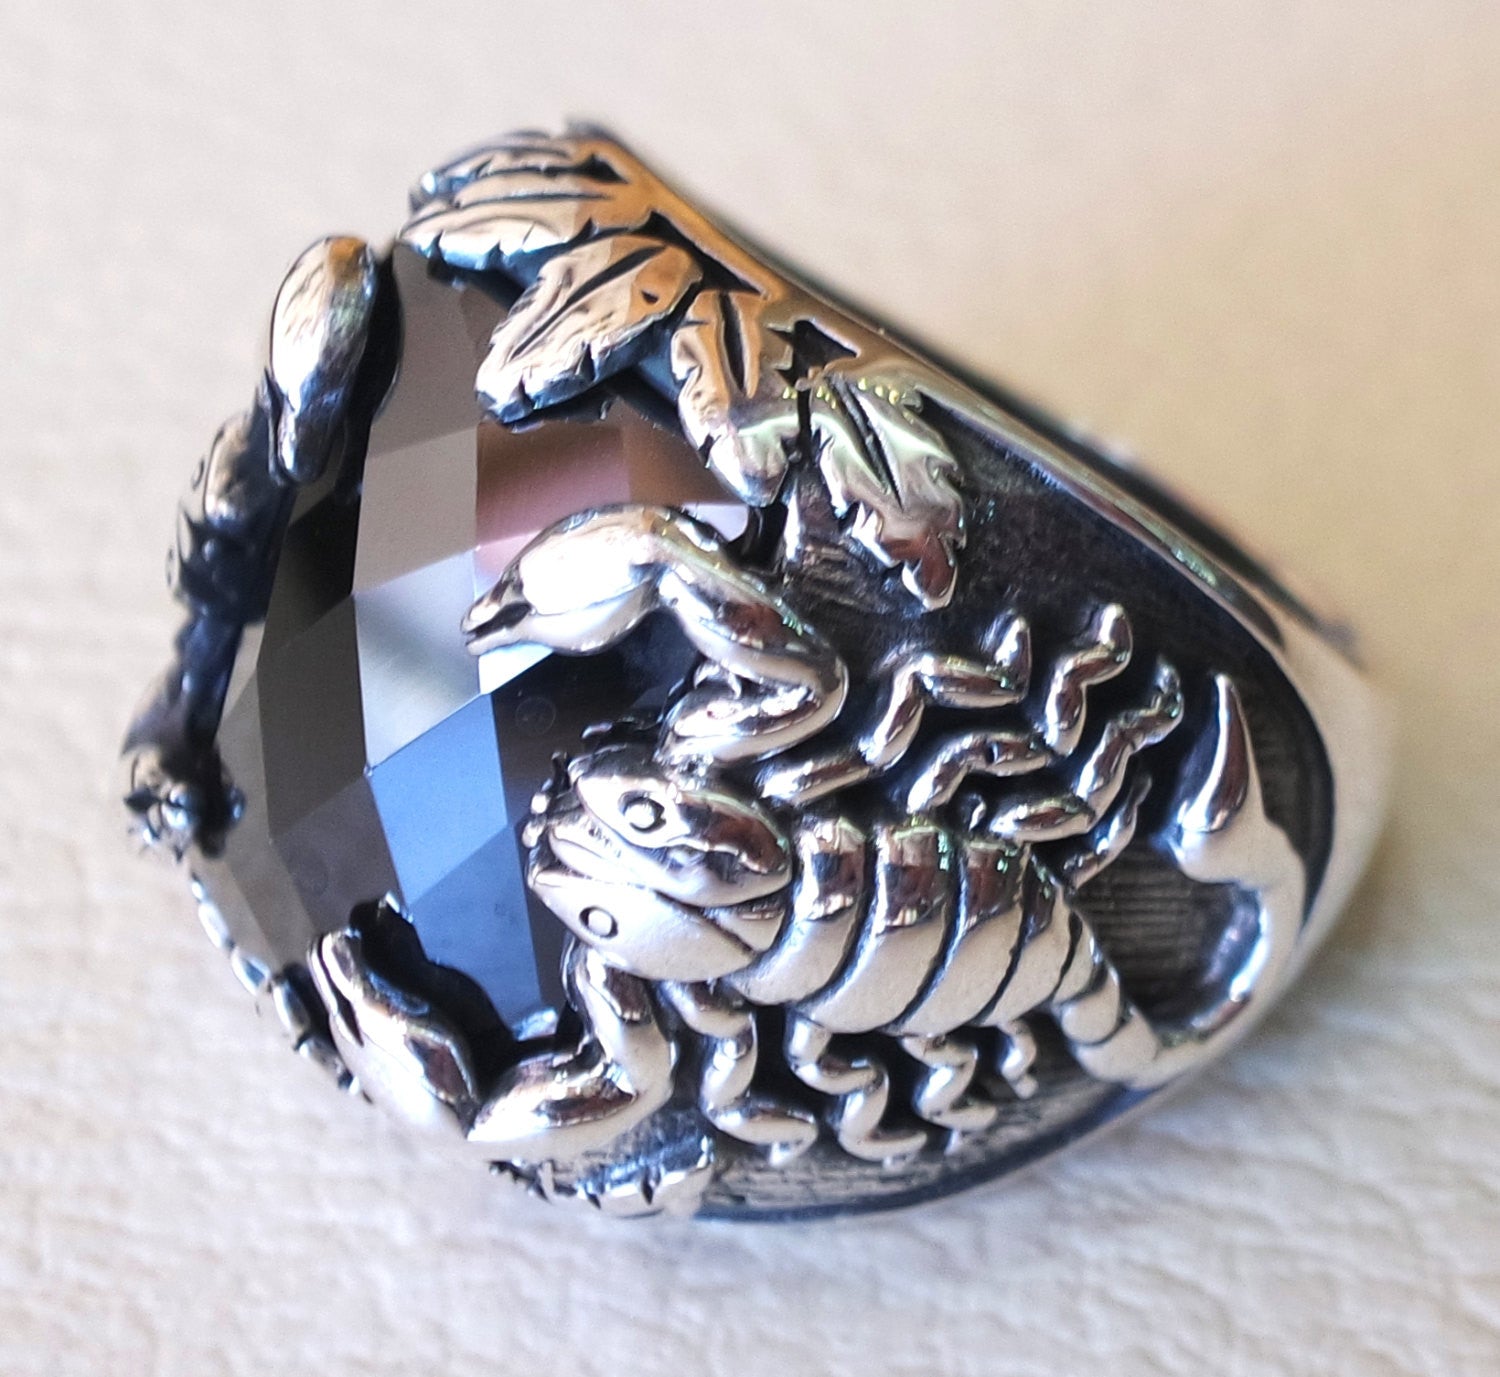 huge scorpion sterling silver 925 huge ring any size rectangular black onyx agate semi precious middle eastern vintage handmade jewelry